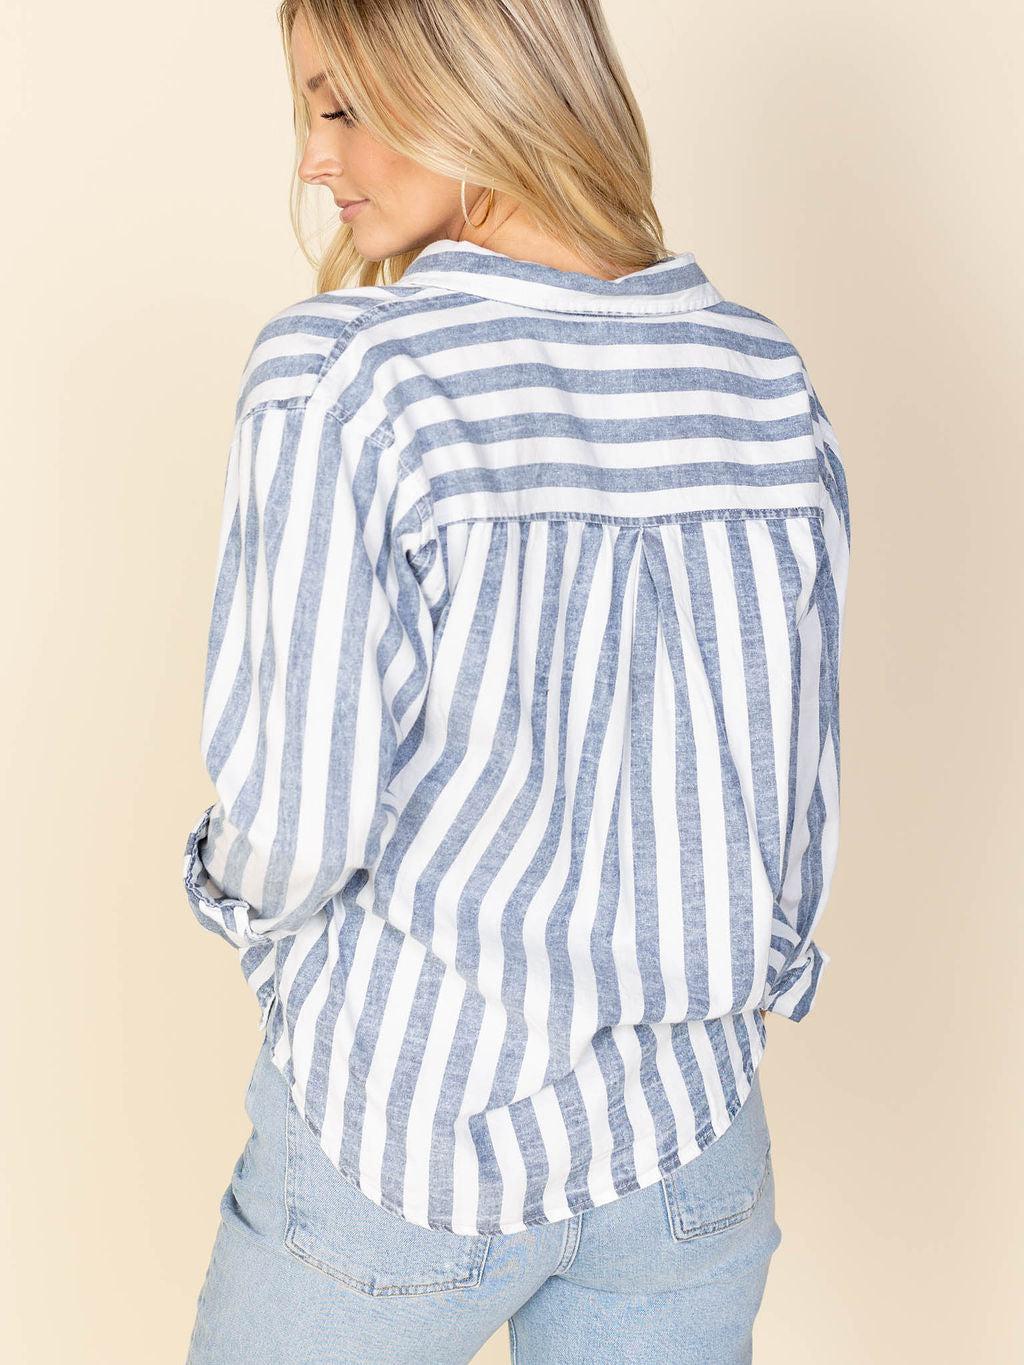 blye and white stripe thread and supply button up